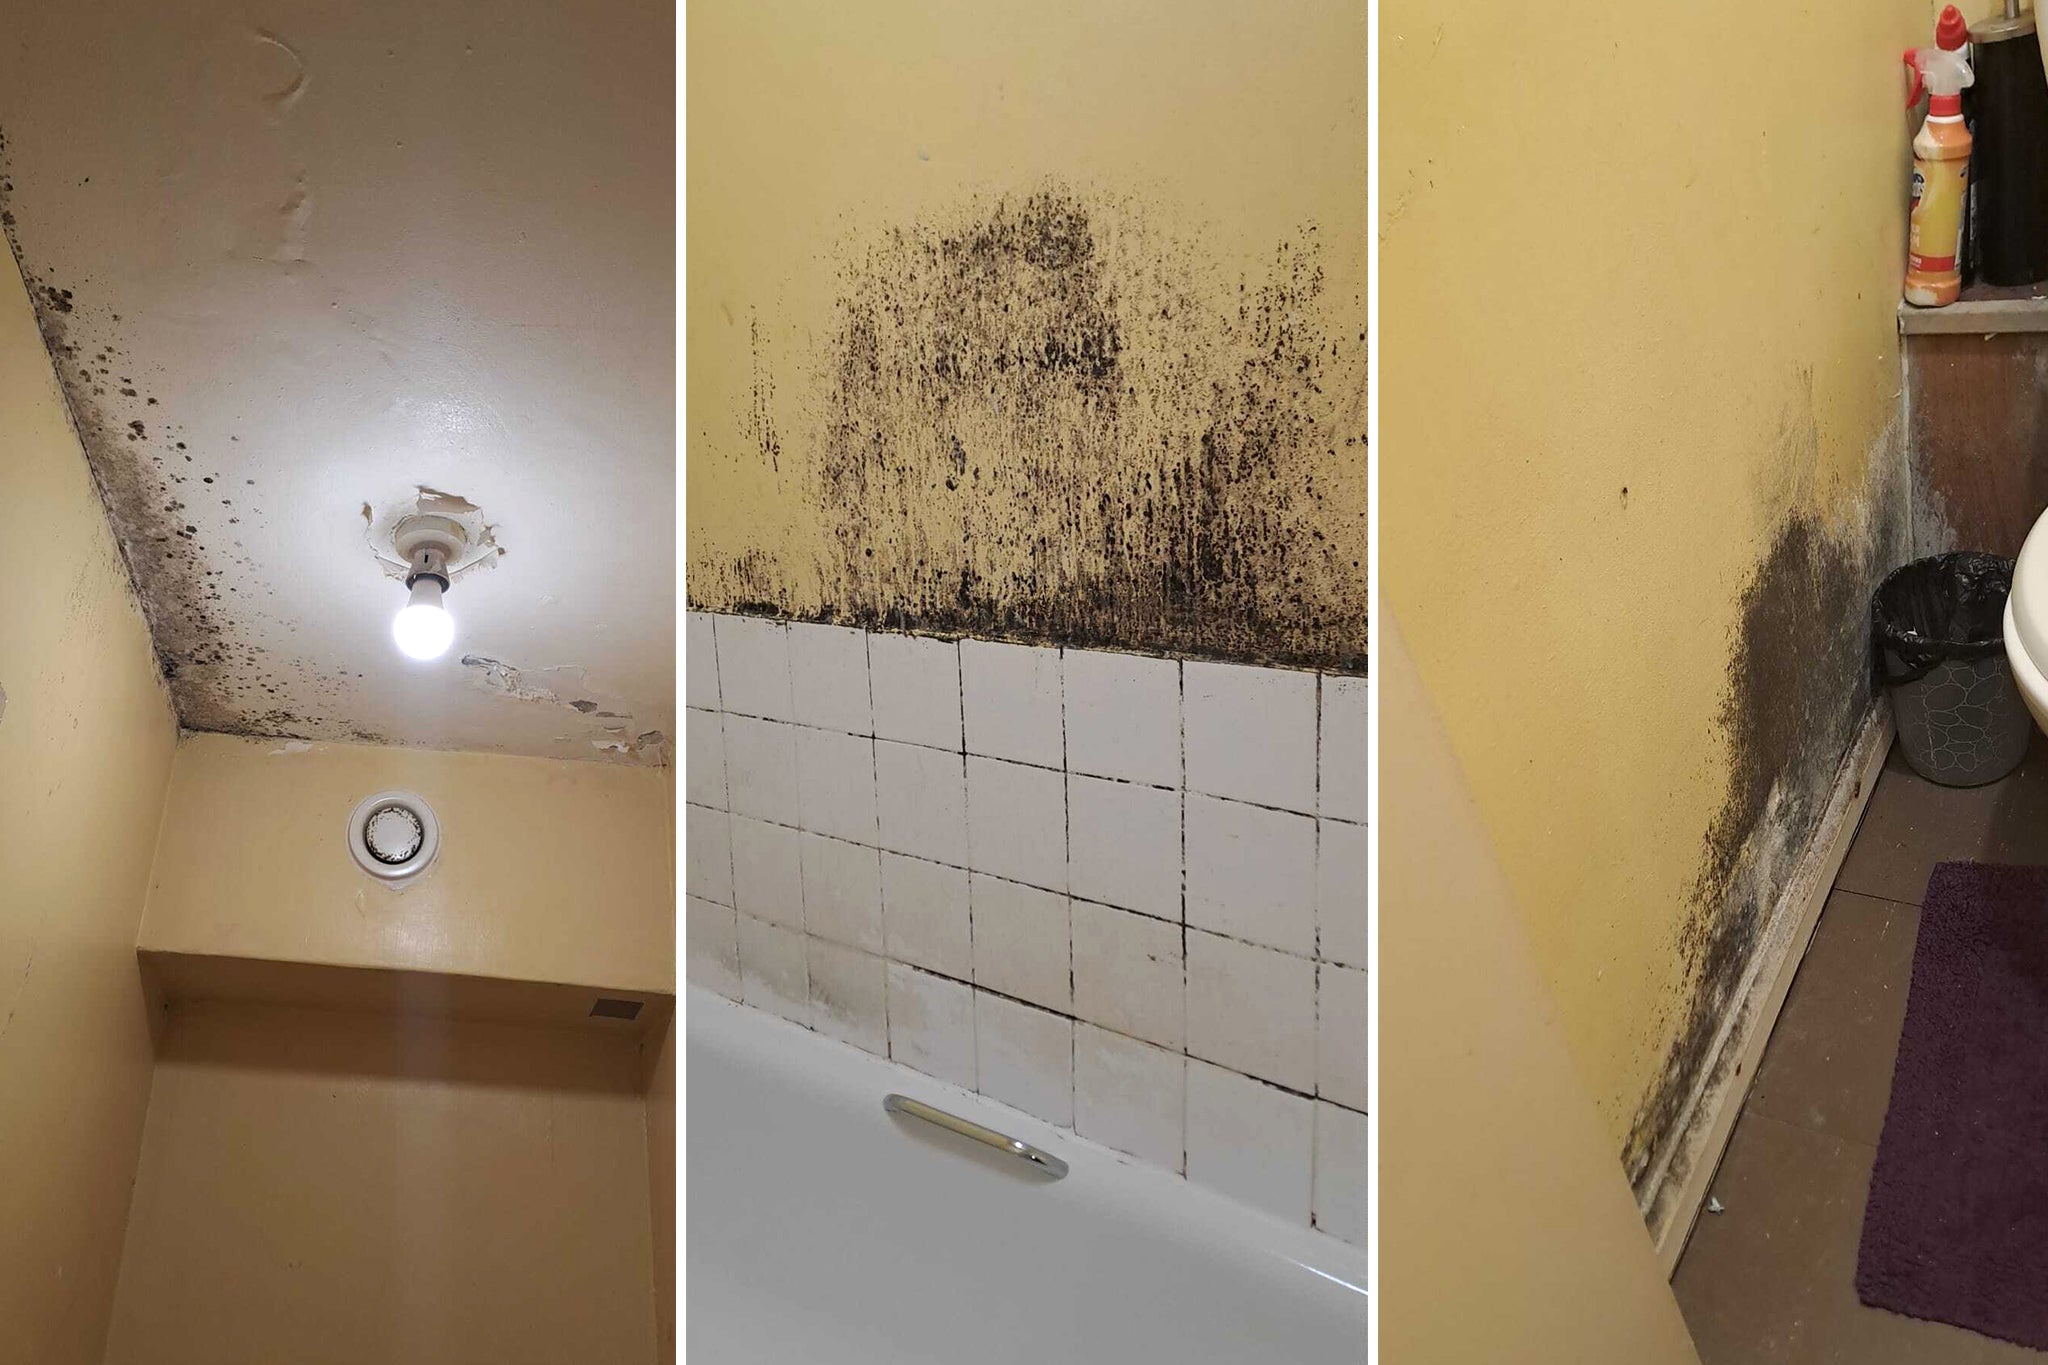 Milford Towers has had problems with mould in flats. Pictures from a Lewisham Council-maintained flat on the fifth floor